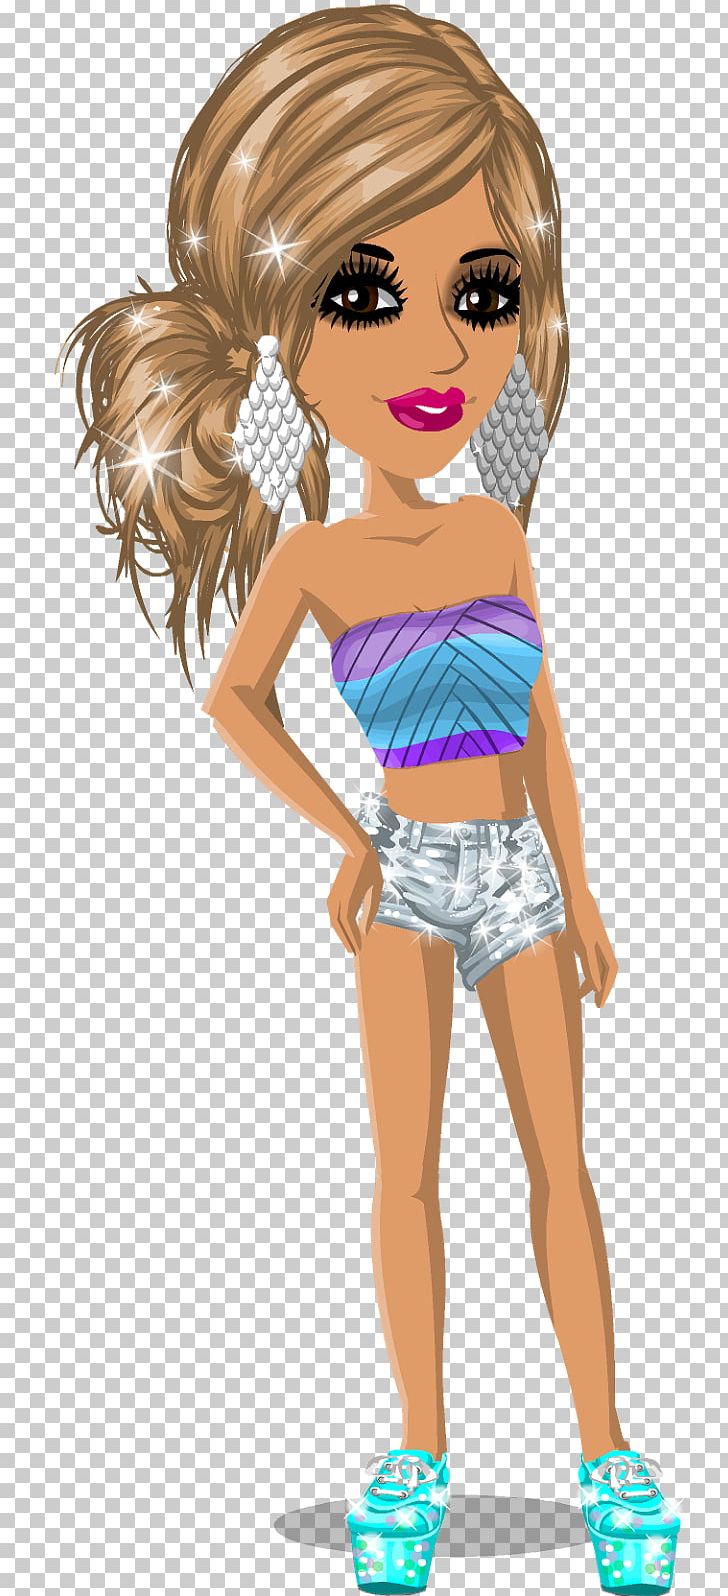 MovieStarPlanet World Game Clothing PNG, Clipart, Arm, Barbie, Blog, Brown Hair, Cartoon Free PNG Download